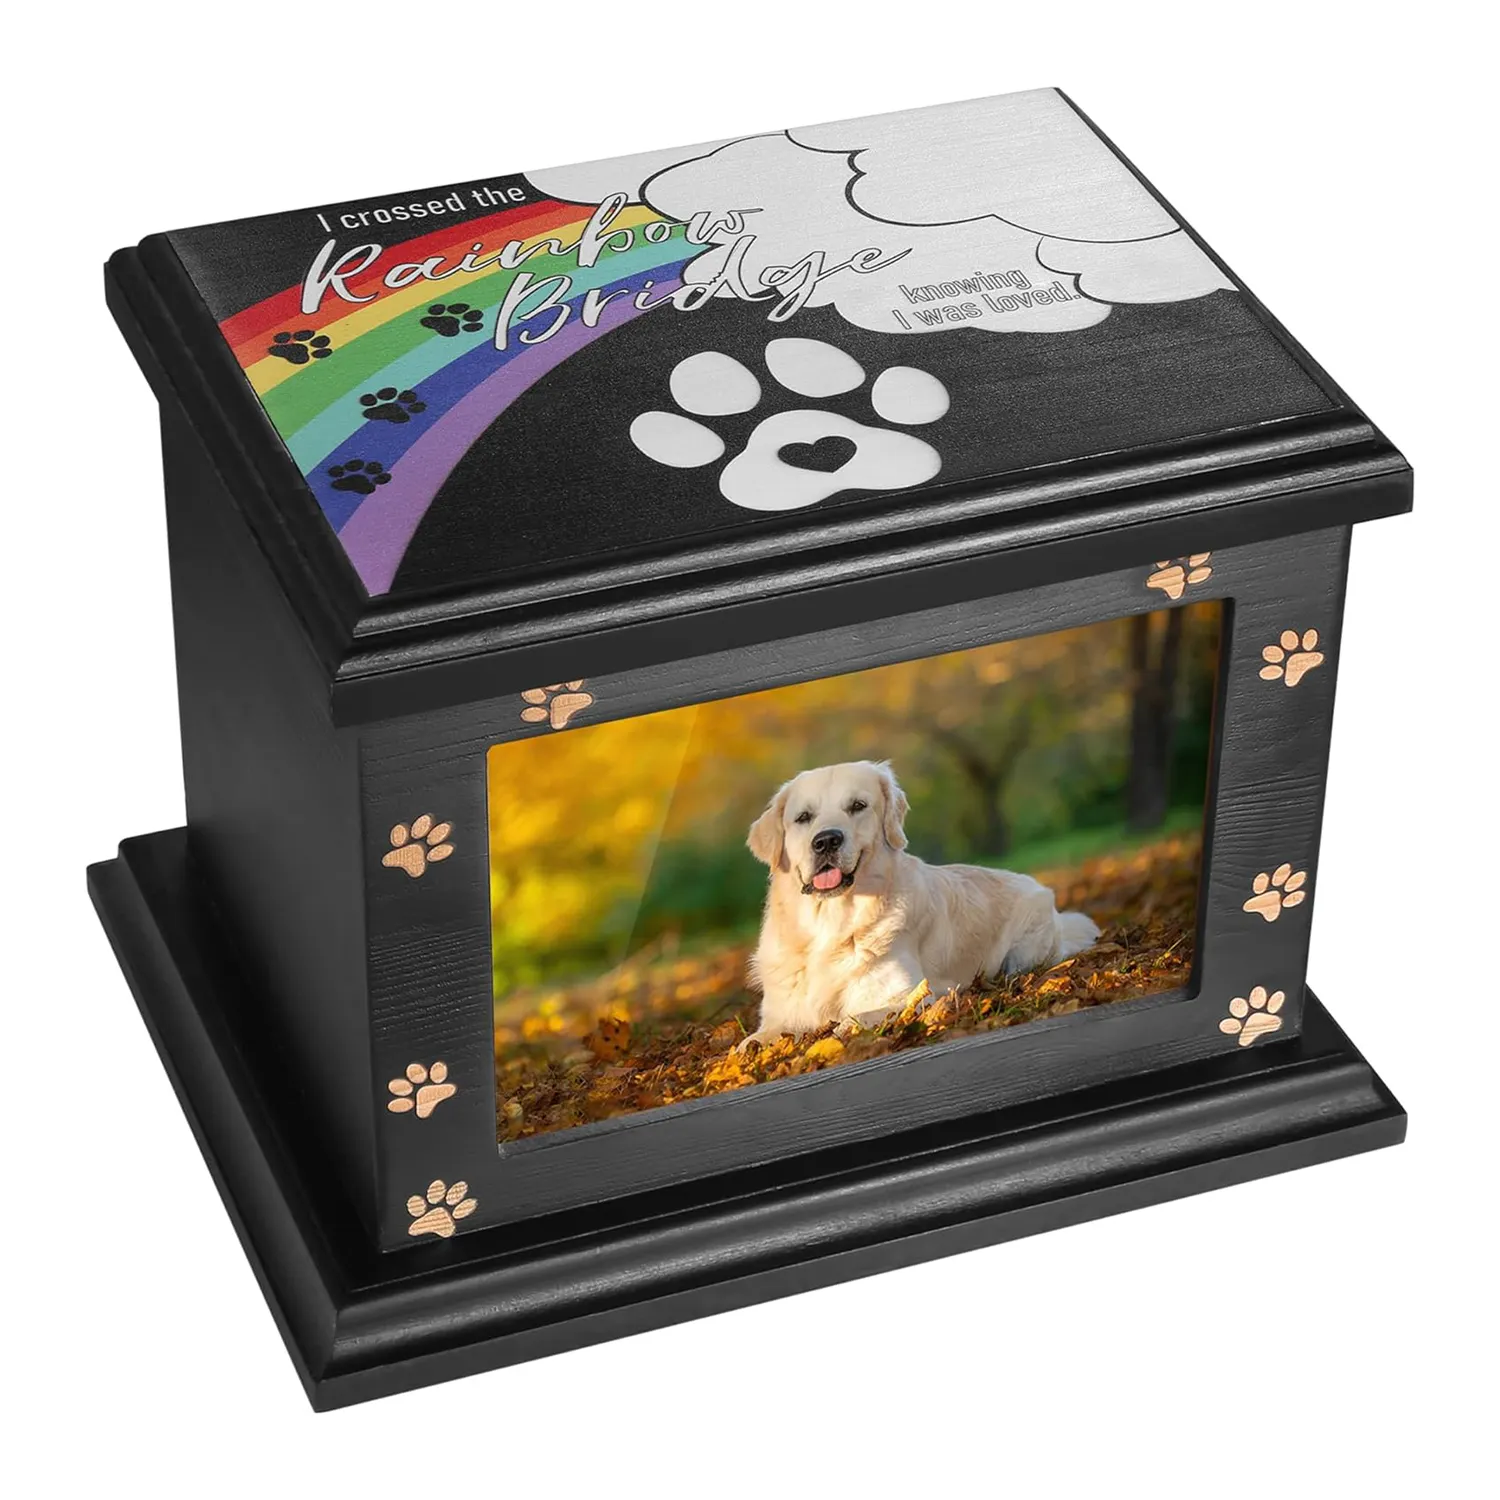 Wood Cremation Urn Handmade Pet Memorial Urns for Dogs or Cats Ashes Casket Burial Ashes Urn